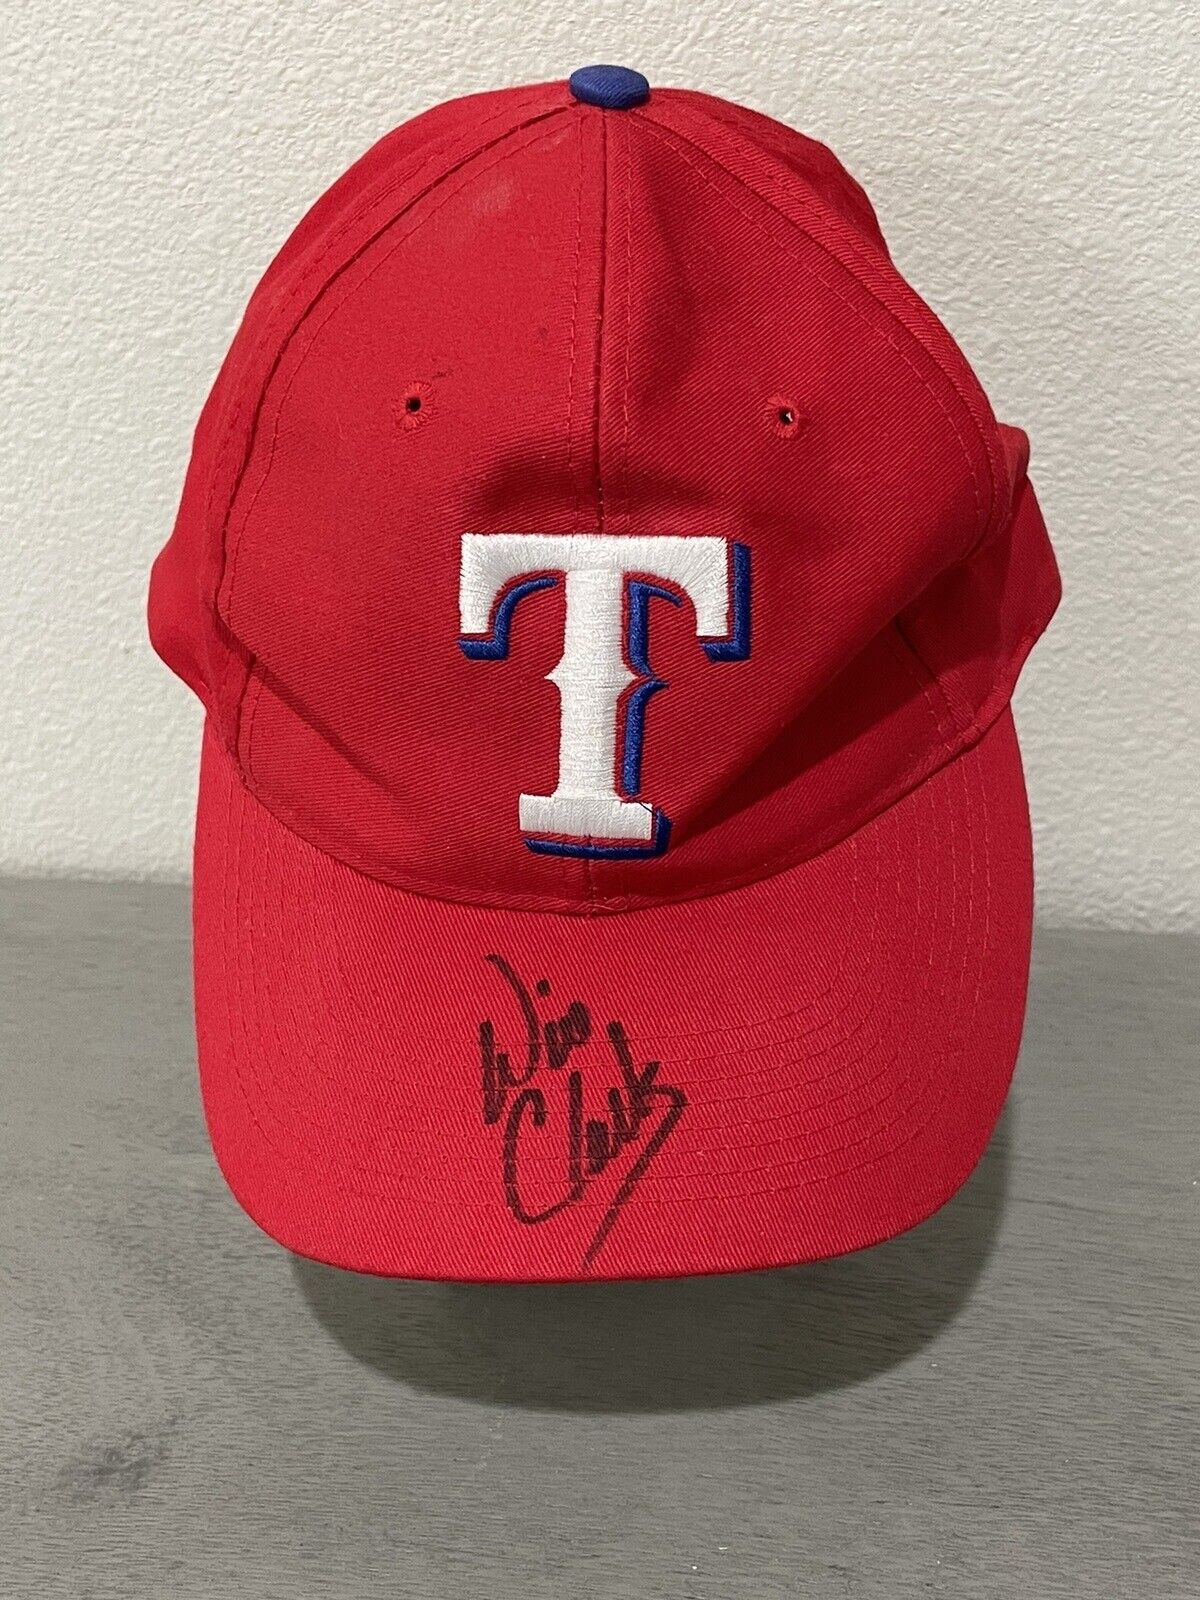 Will Clark a.k.a Will The Thrill Autographed Texas Rangers Hat